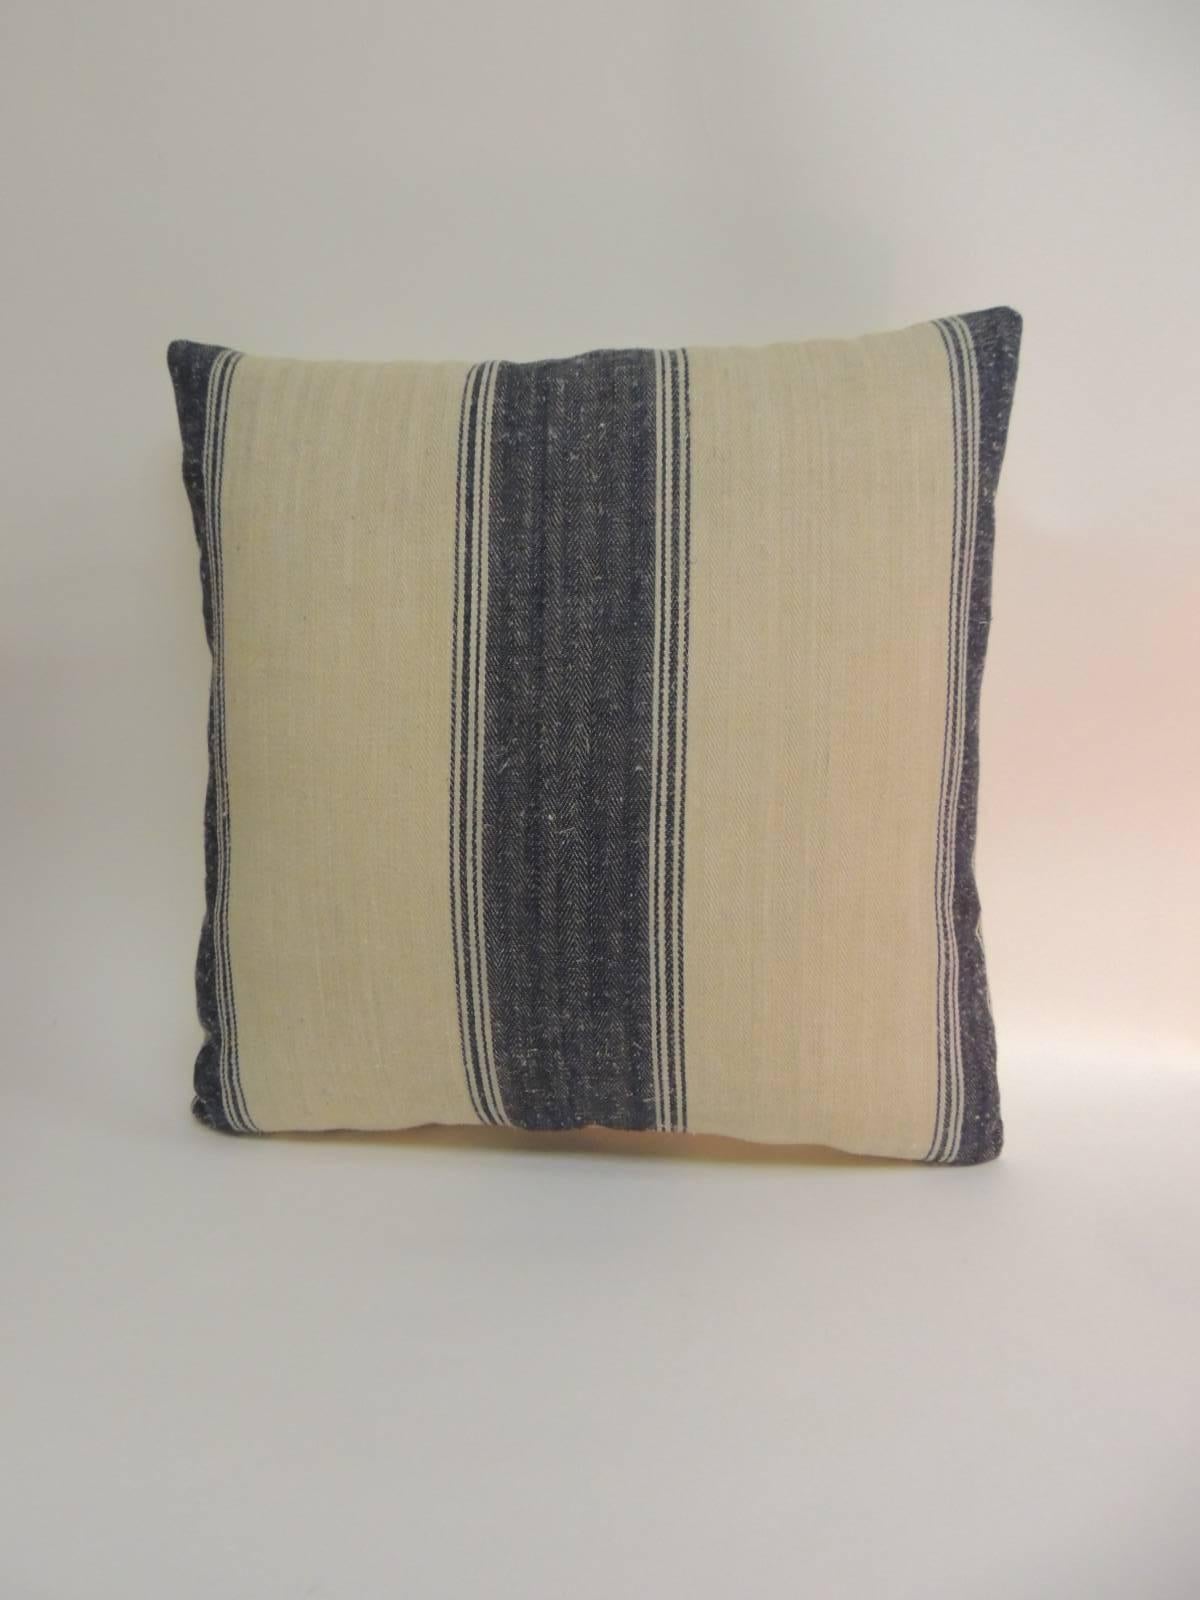 French Provincial Pair of 19th Century French Dark Blue Stripes Decorative Pillows